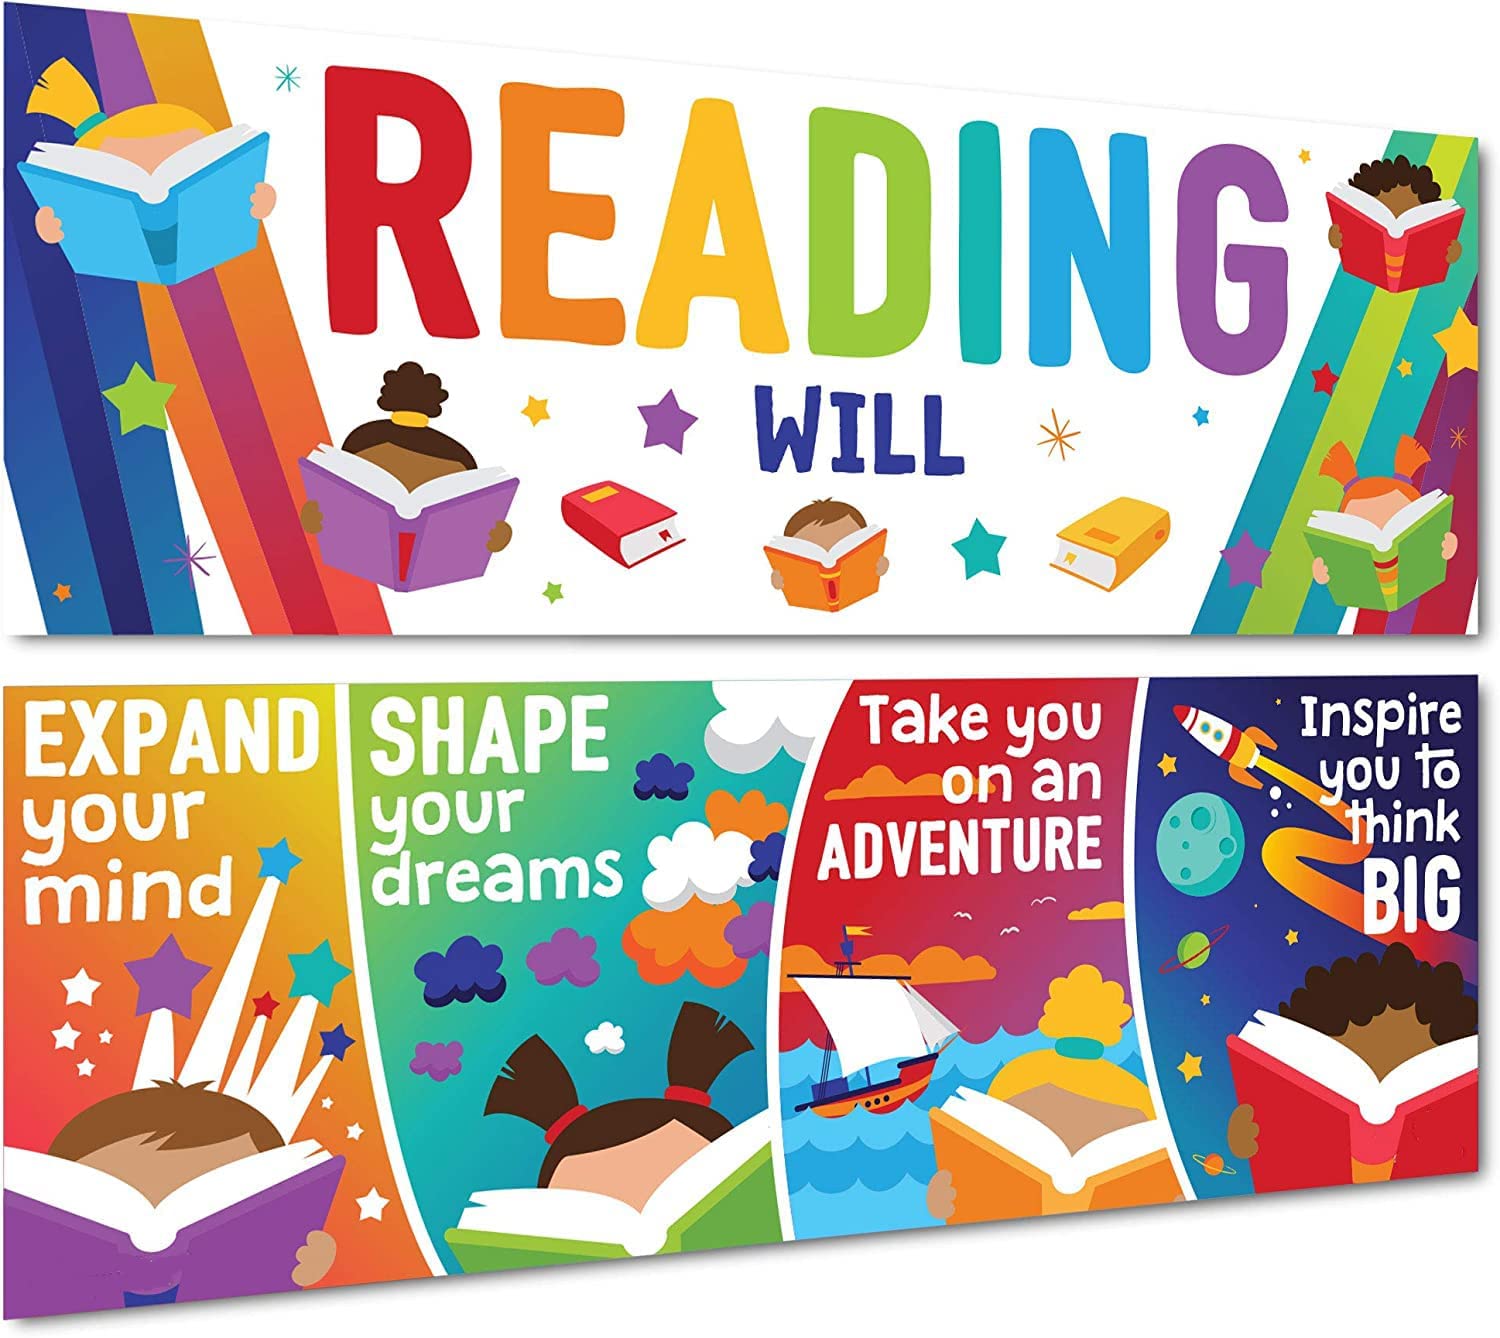 A poster for classrooms in schools about reading 35×100 CM - Multi Color